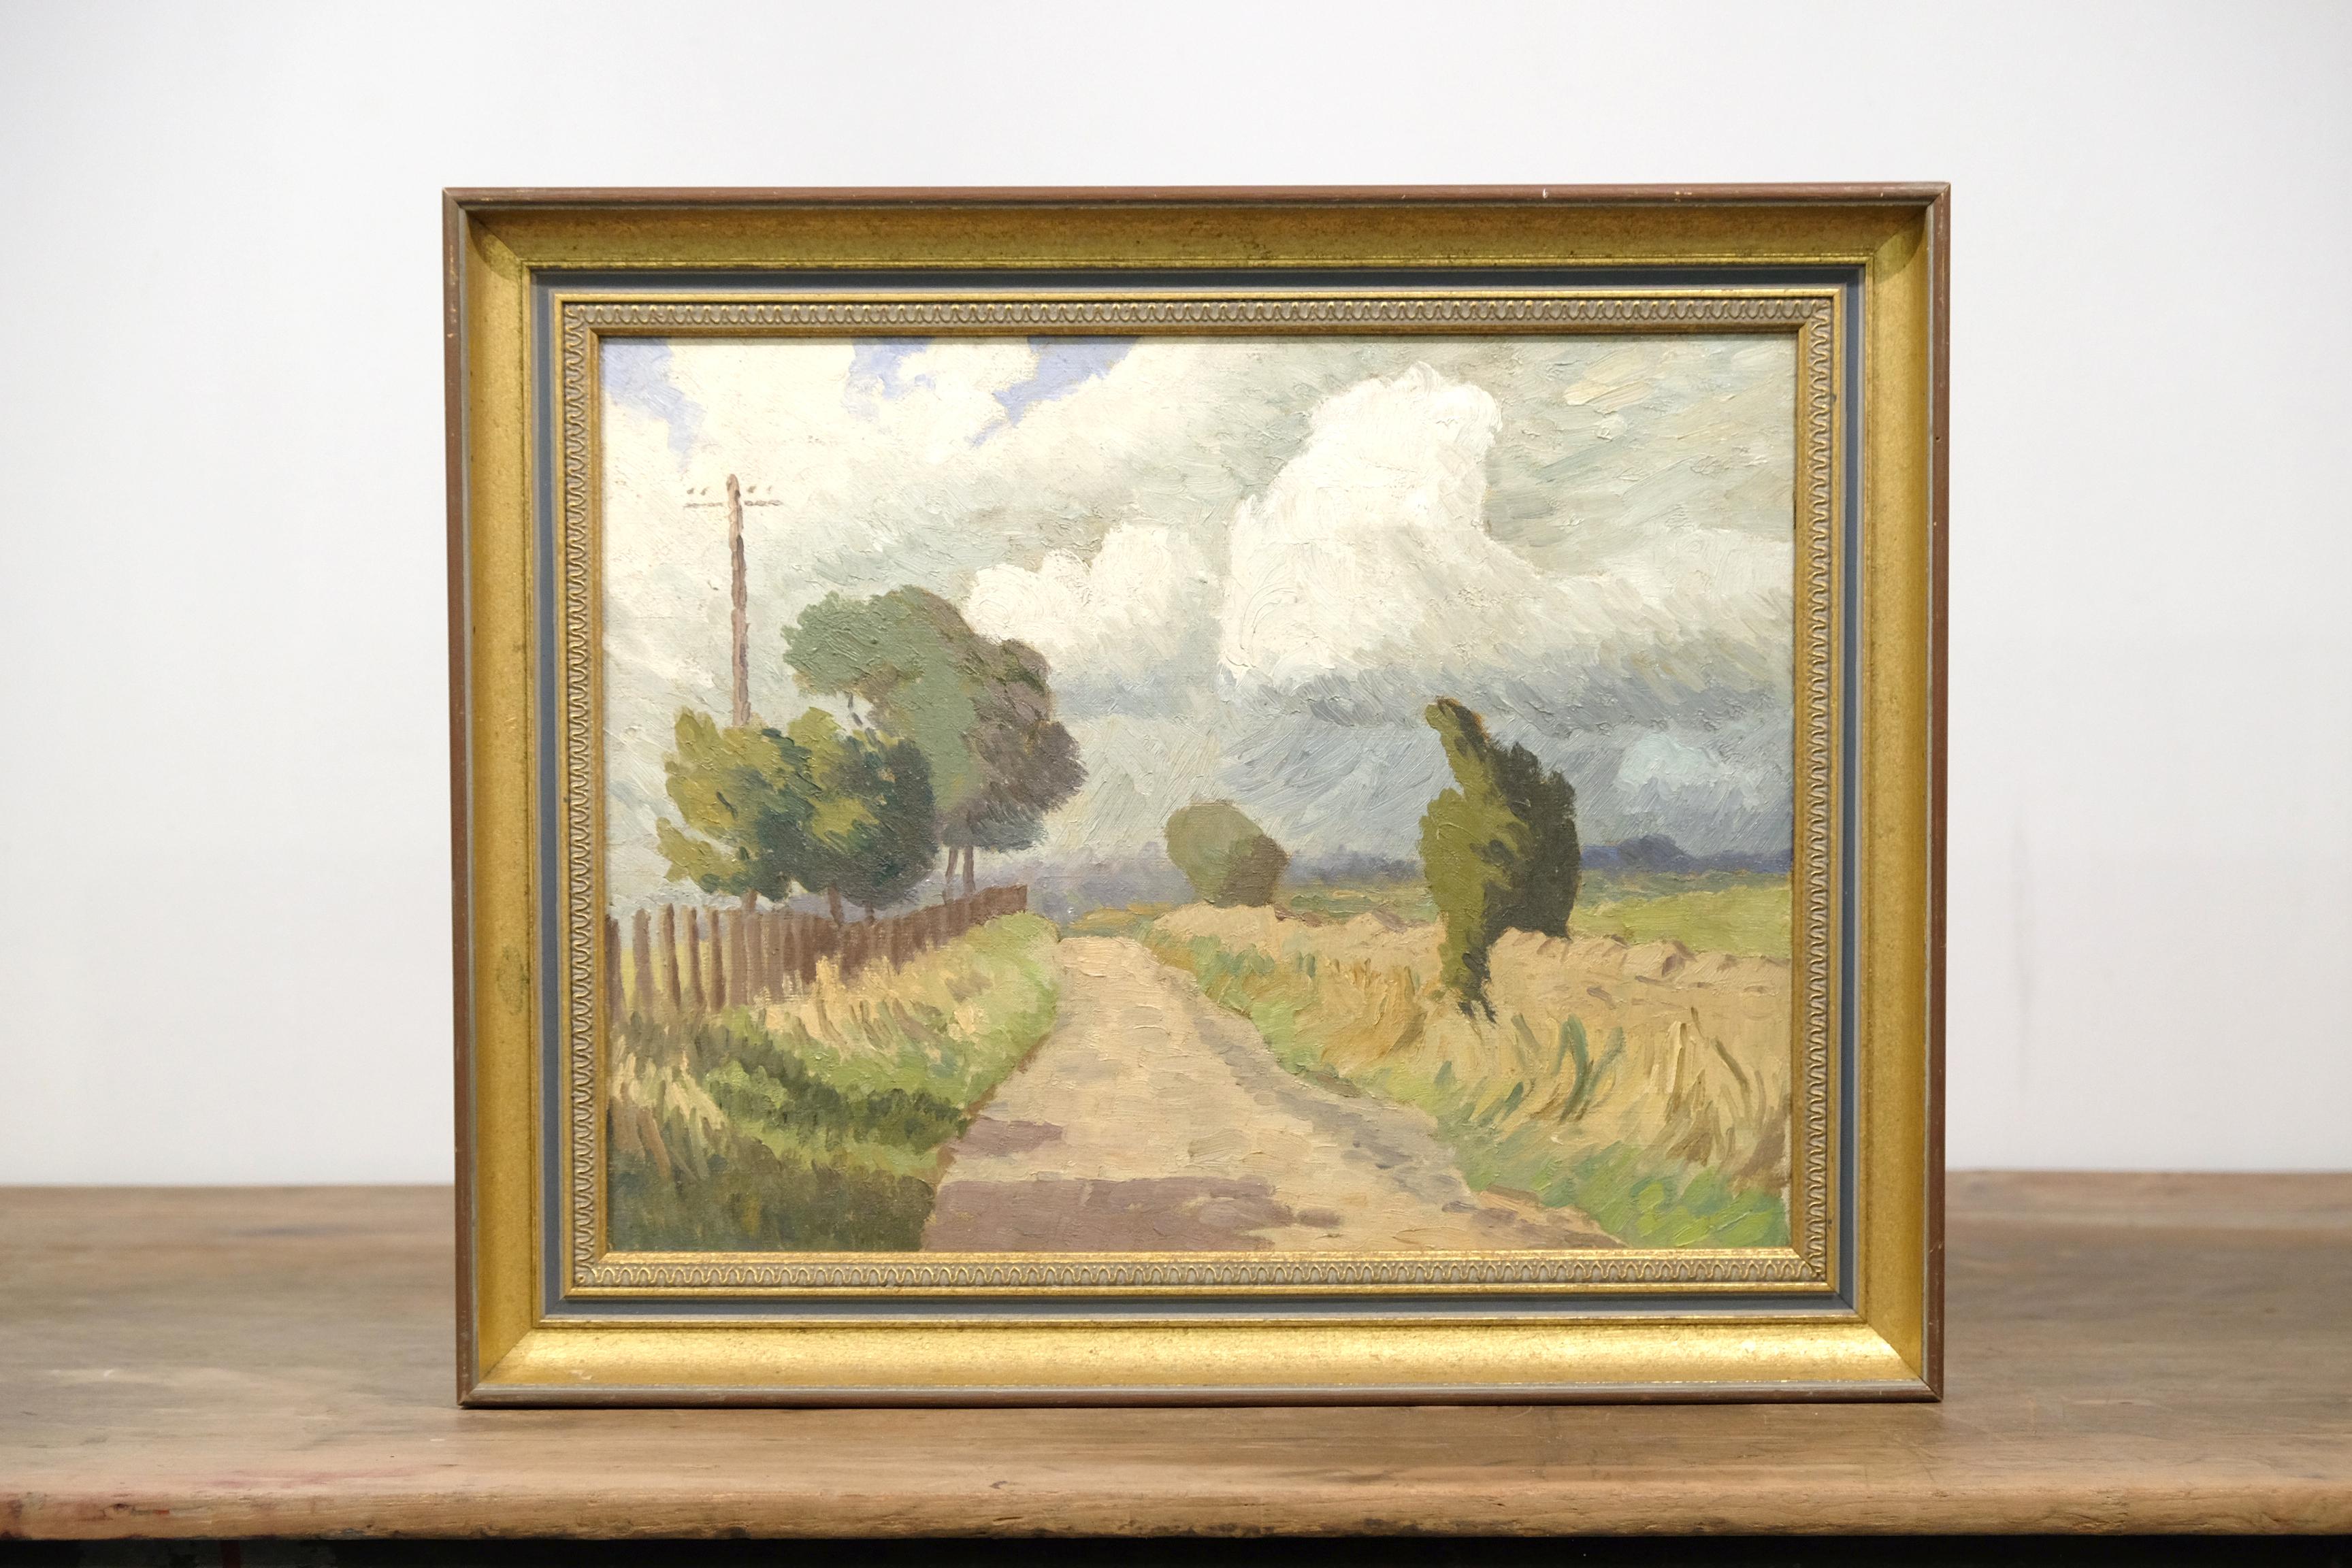 Charming impressionist style oil on board painting of a country lane in Berkshire, United Kingdom. Great atmosphere, we particularly like the clouds. Looks like a lane we'd like to wistfully wander along. In a contemporary gilt effect frame.